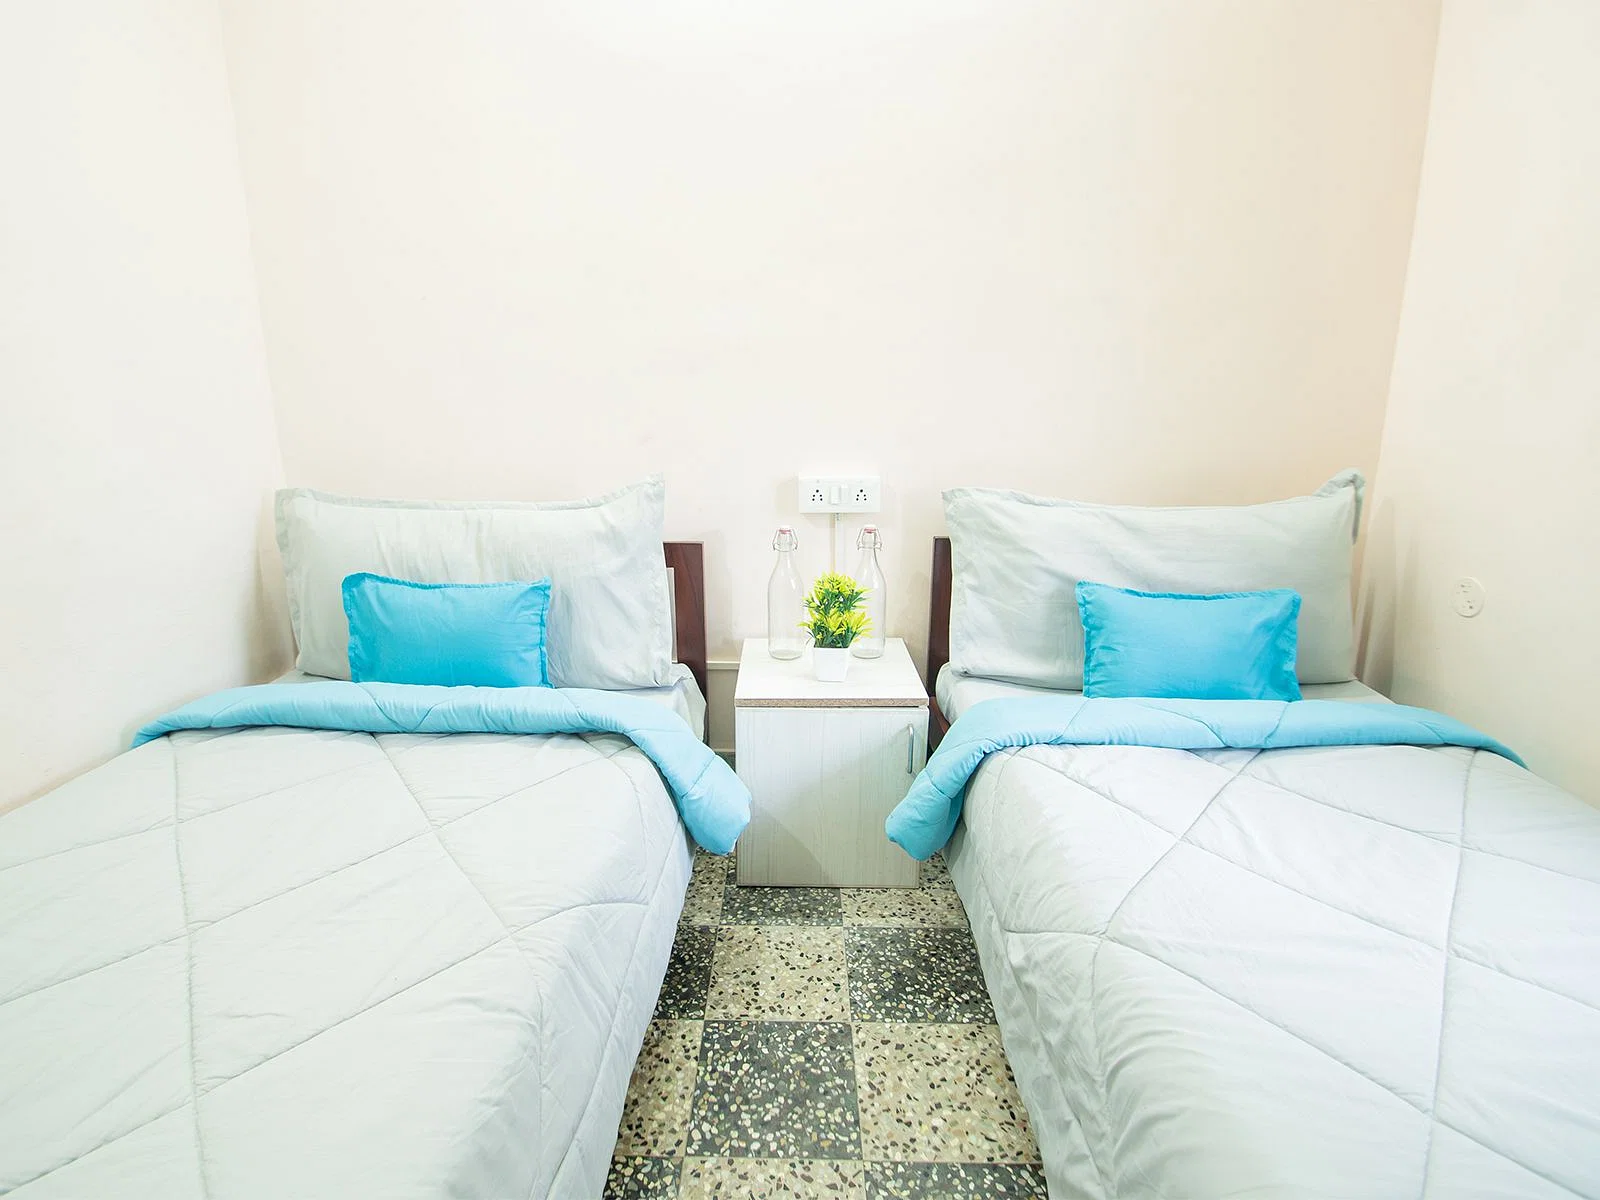 budget-friendly PGs and hostels for boys and girls with single rooms with daily hopusekeeping-Zolo Rozzby B